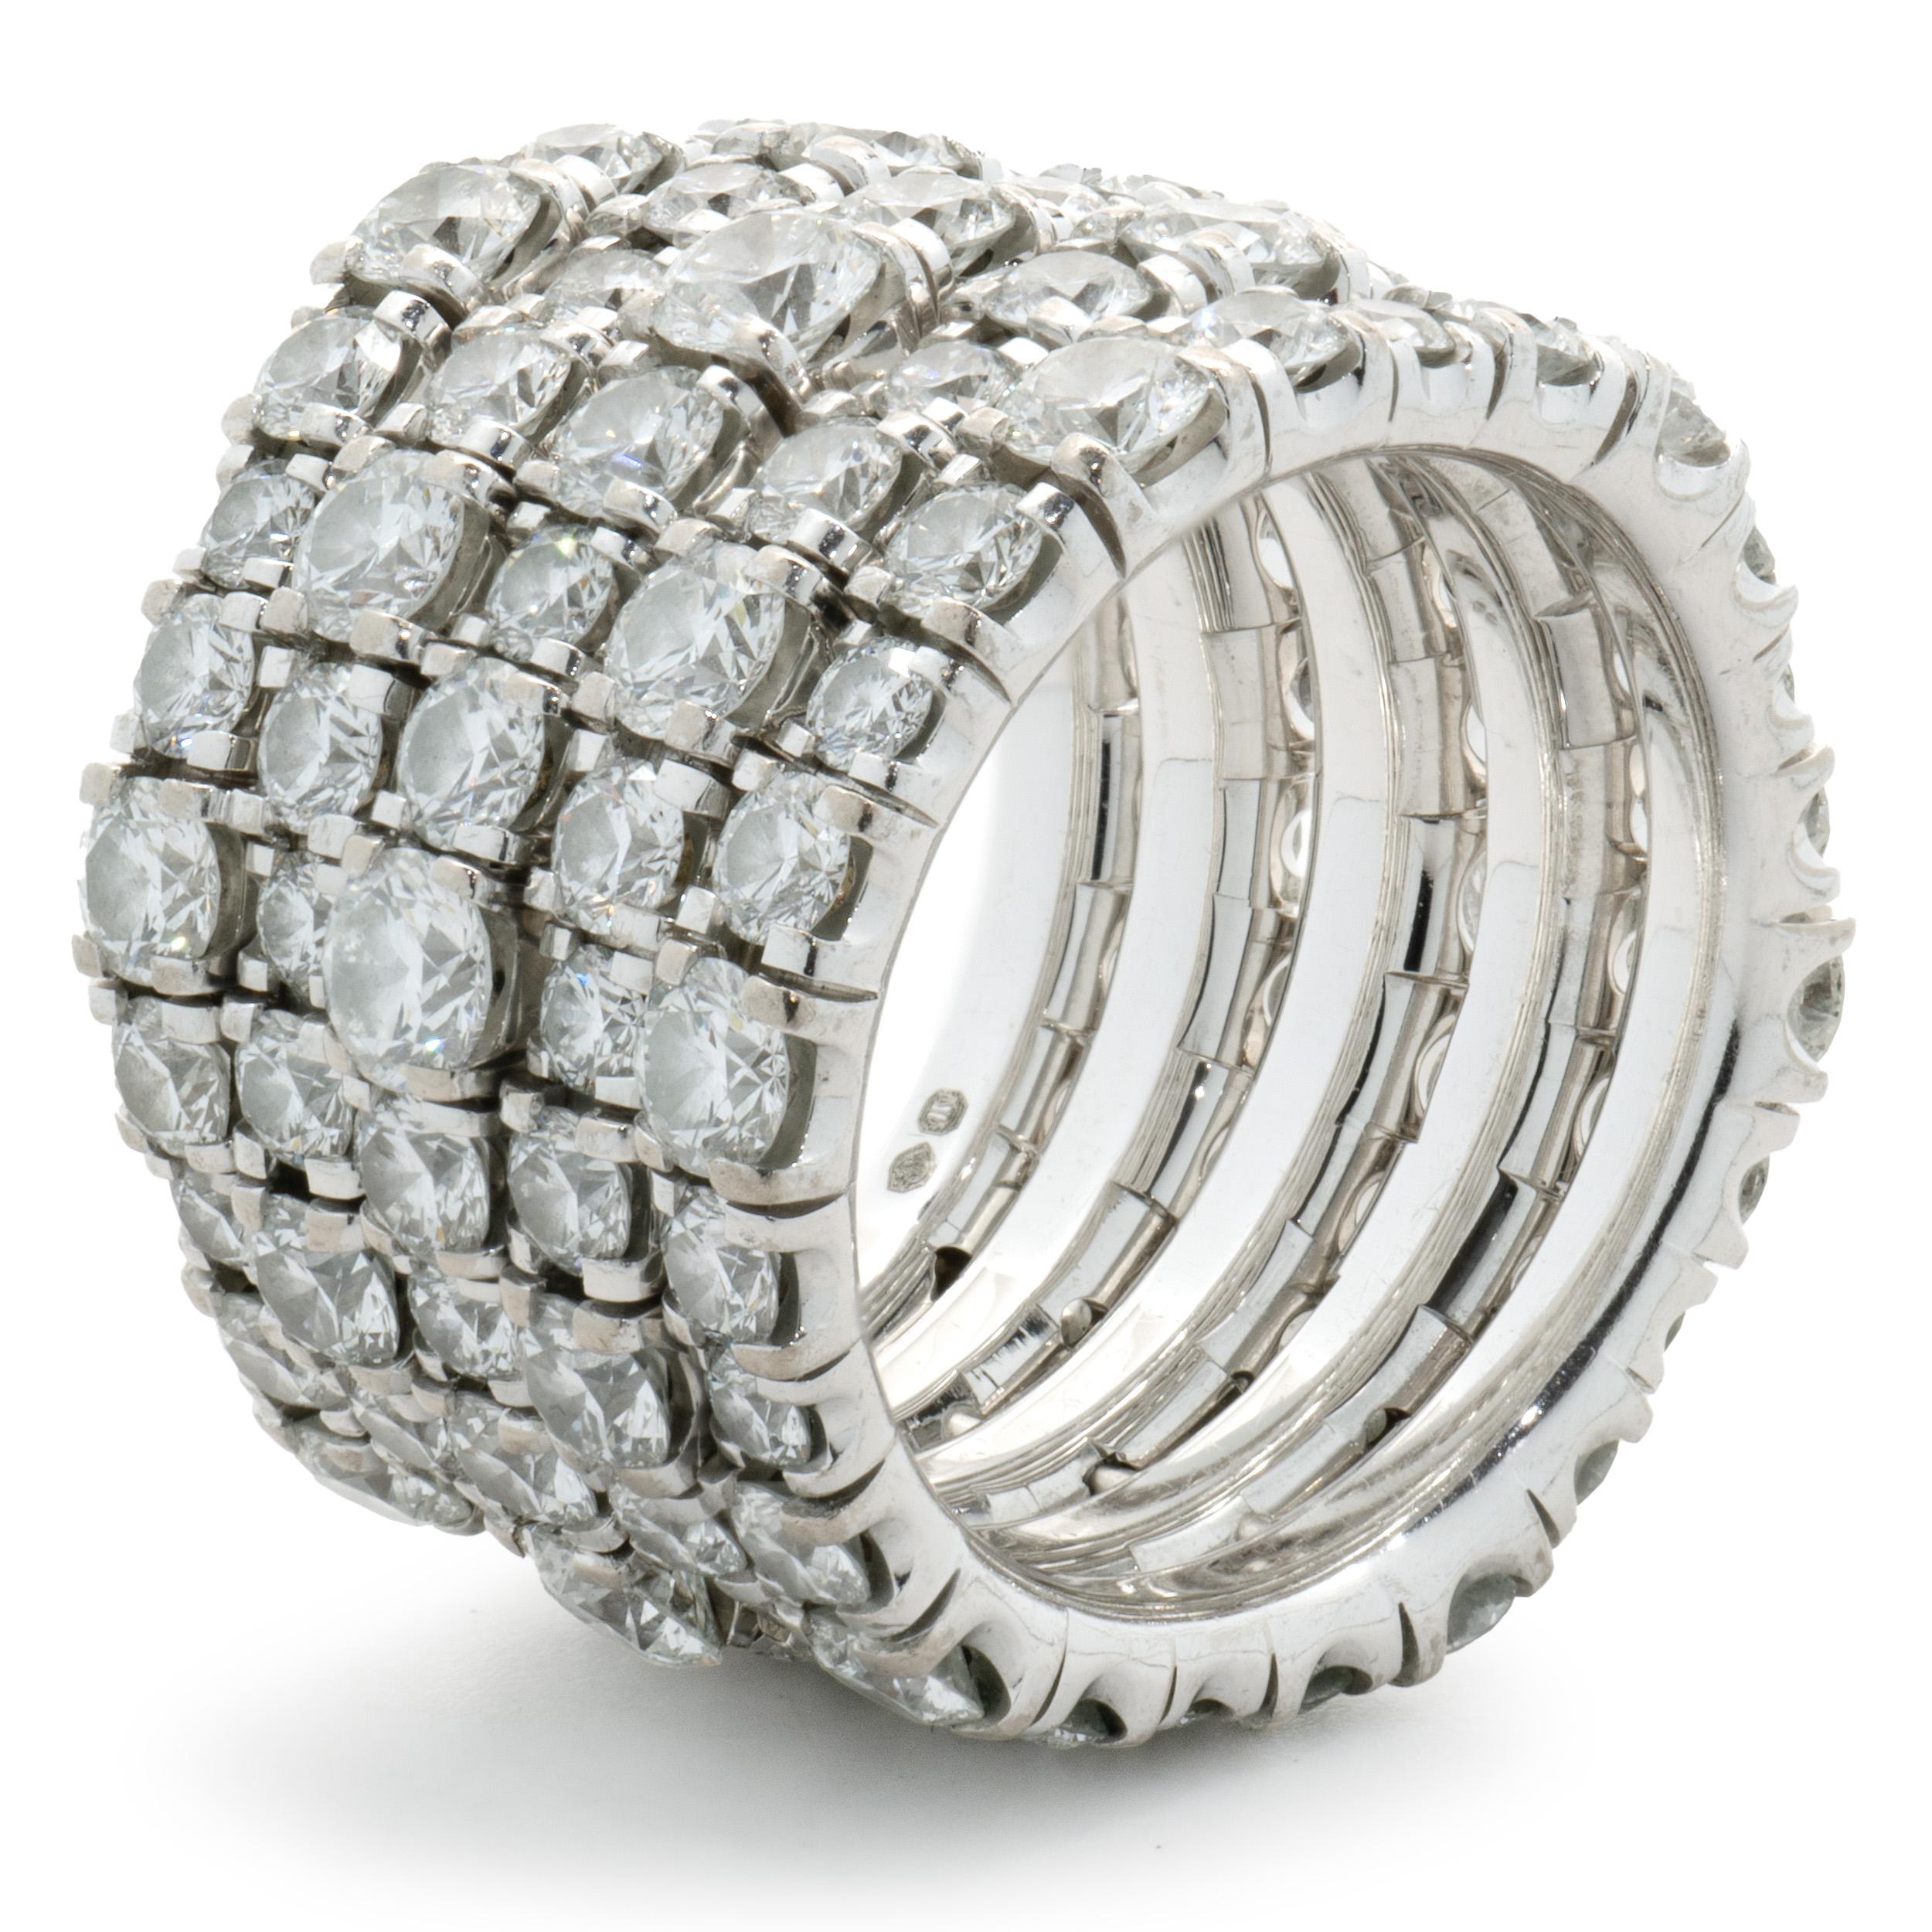 Cartier 18 Karat White Gold Five Row Diamond Eternity Ring In Excellent Condition For Sale In Scottsdale, AZ